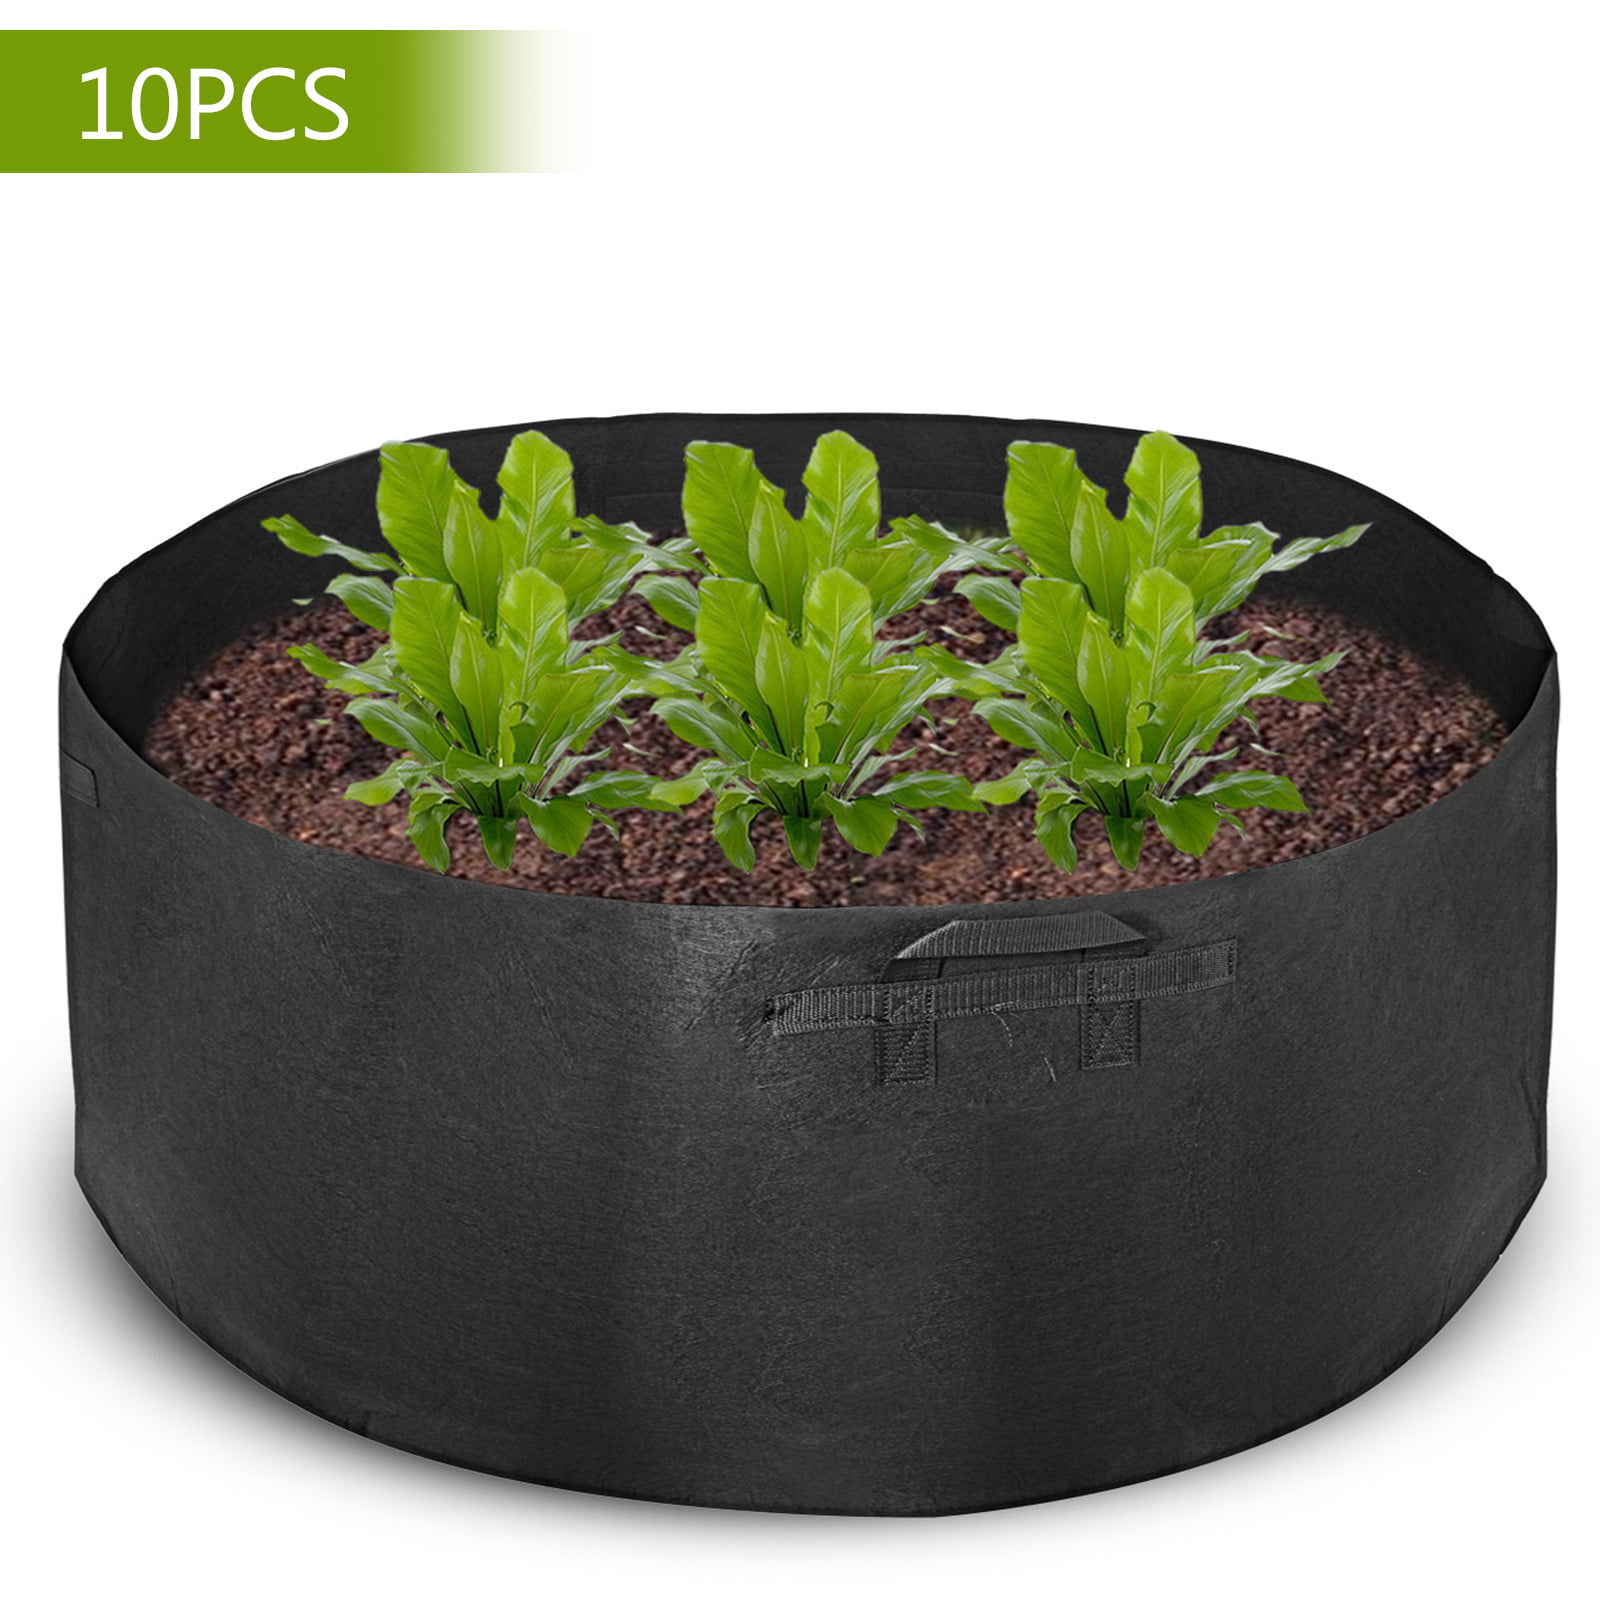 Details about   10 Pack Grow Bag Garden Heavy Duty Non-Woven Aeration Plant Fabric Pot Container 